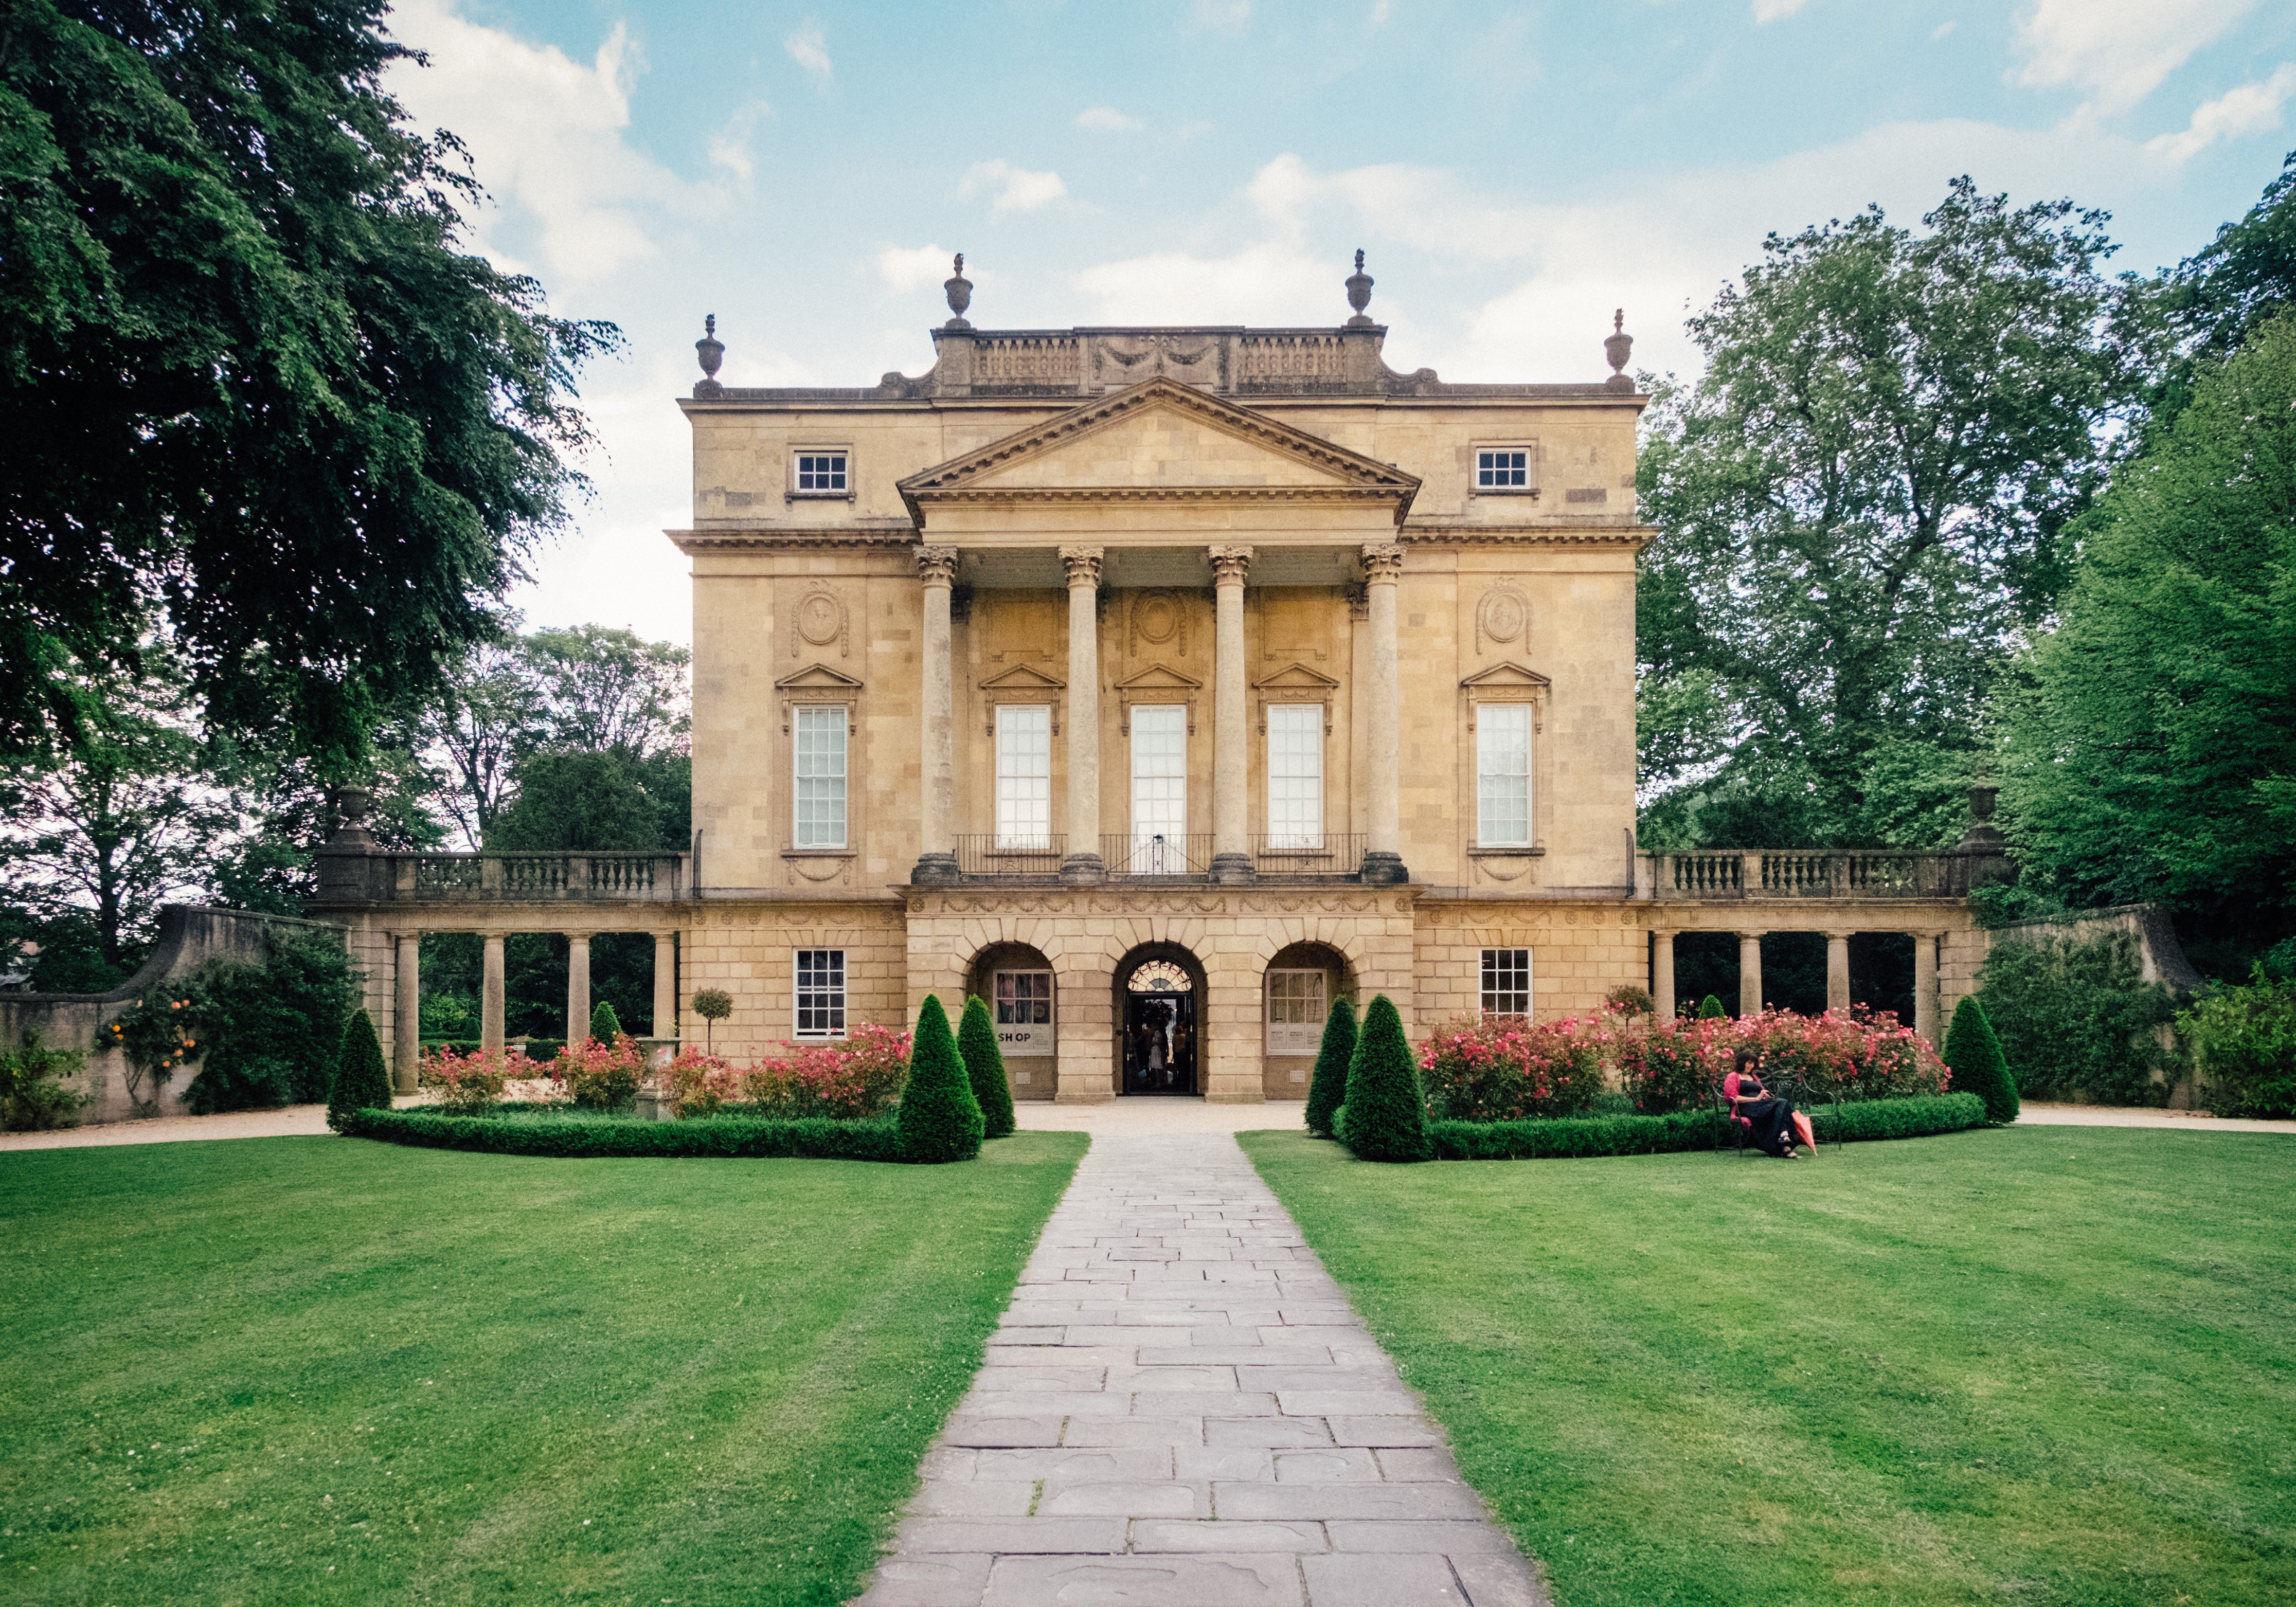 Forest of Imagination teams up with Holburne Museum